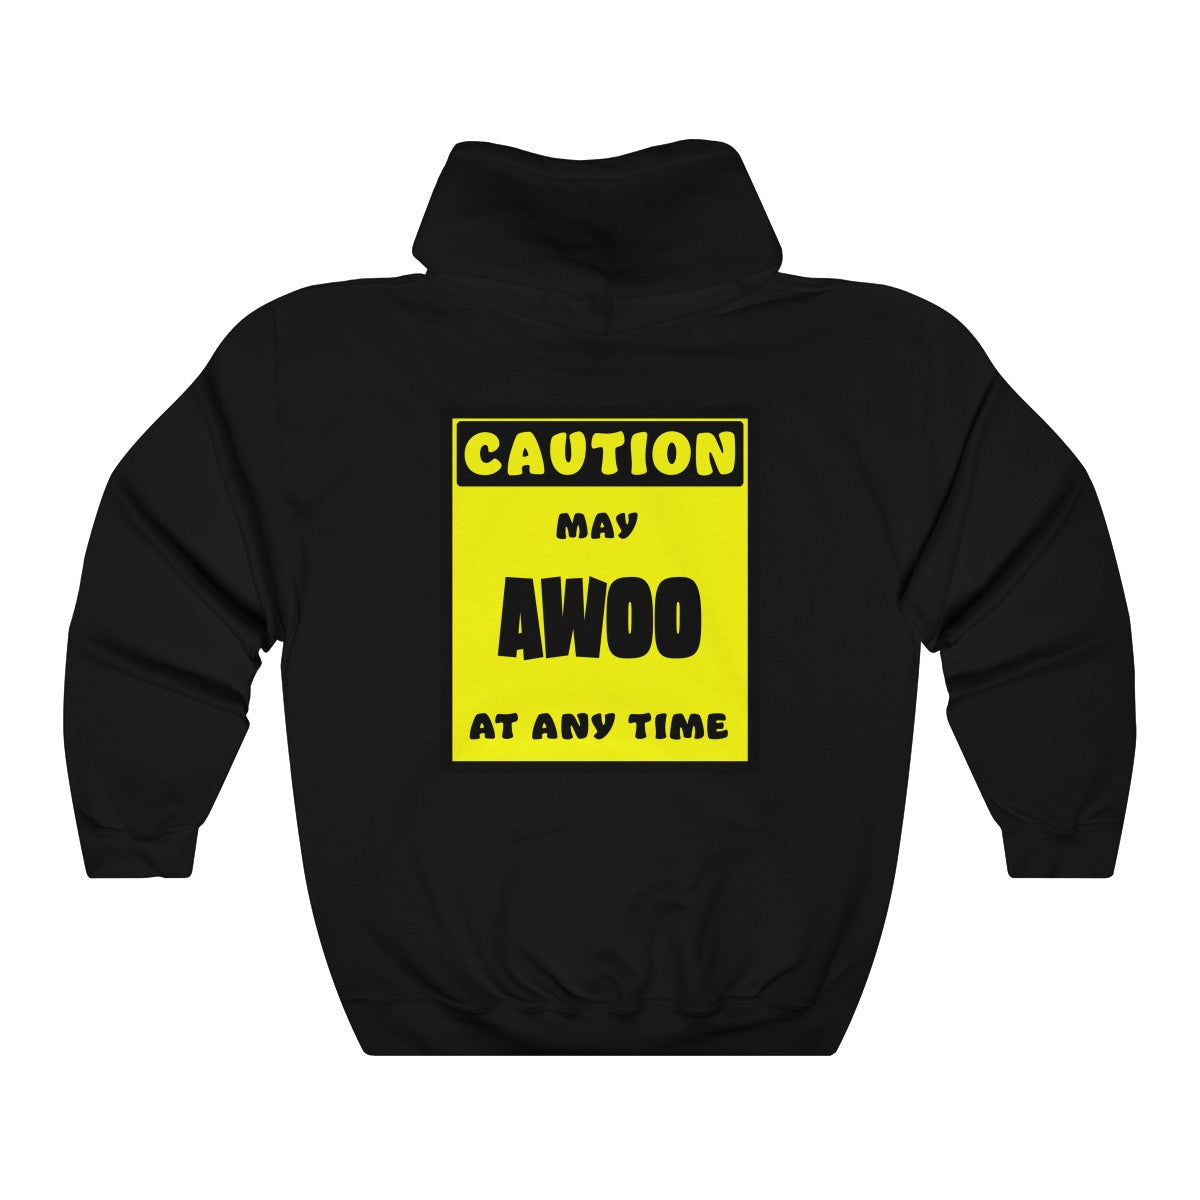 CAUTION! May AWOO at any time! - Hoodie Hoodie AFLT-Whootorca Black S 